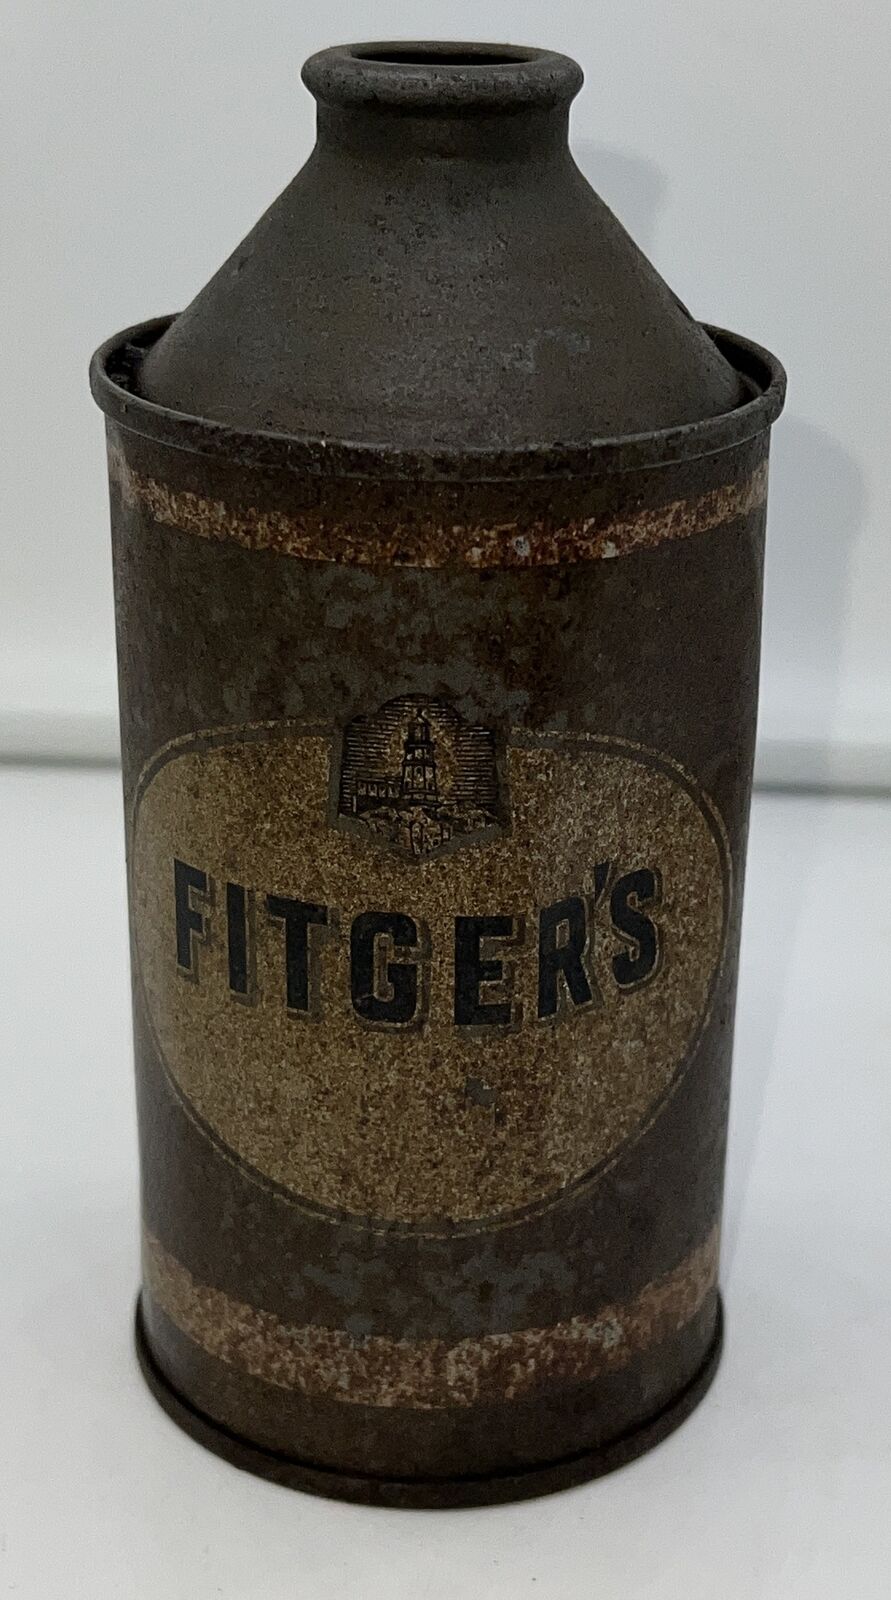 Vintage Fitger's Brewed on the Shores of Lake Superior Cone Top Beer Can